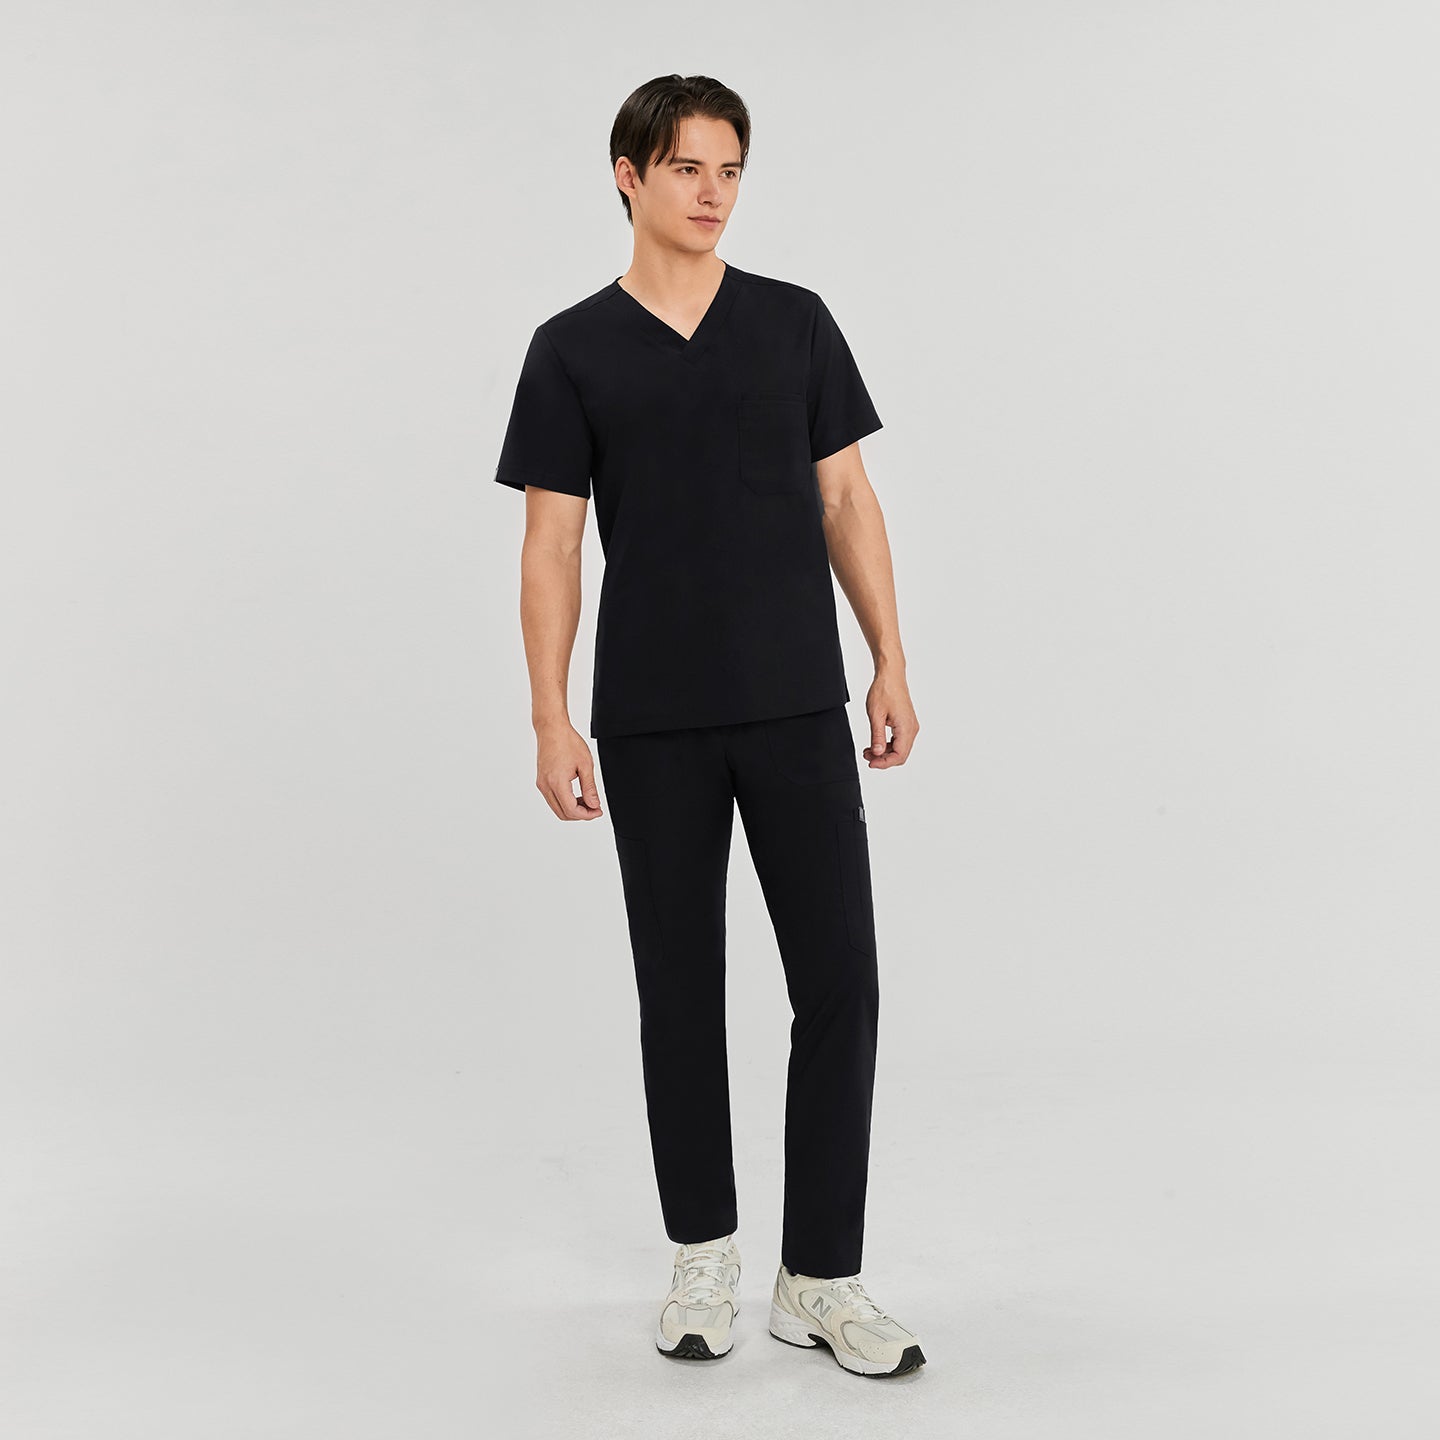 Man wearing zipper straight scrub pants with side pockets, a V-neck scrub top, and white New Balance sneakers,Eco Black